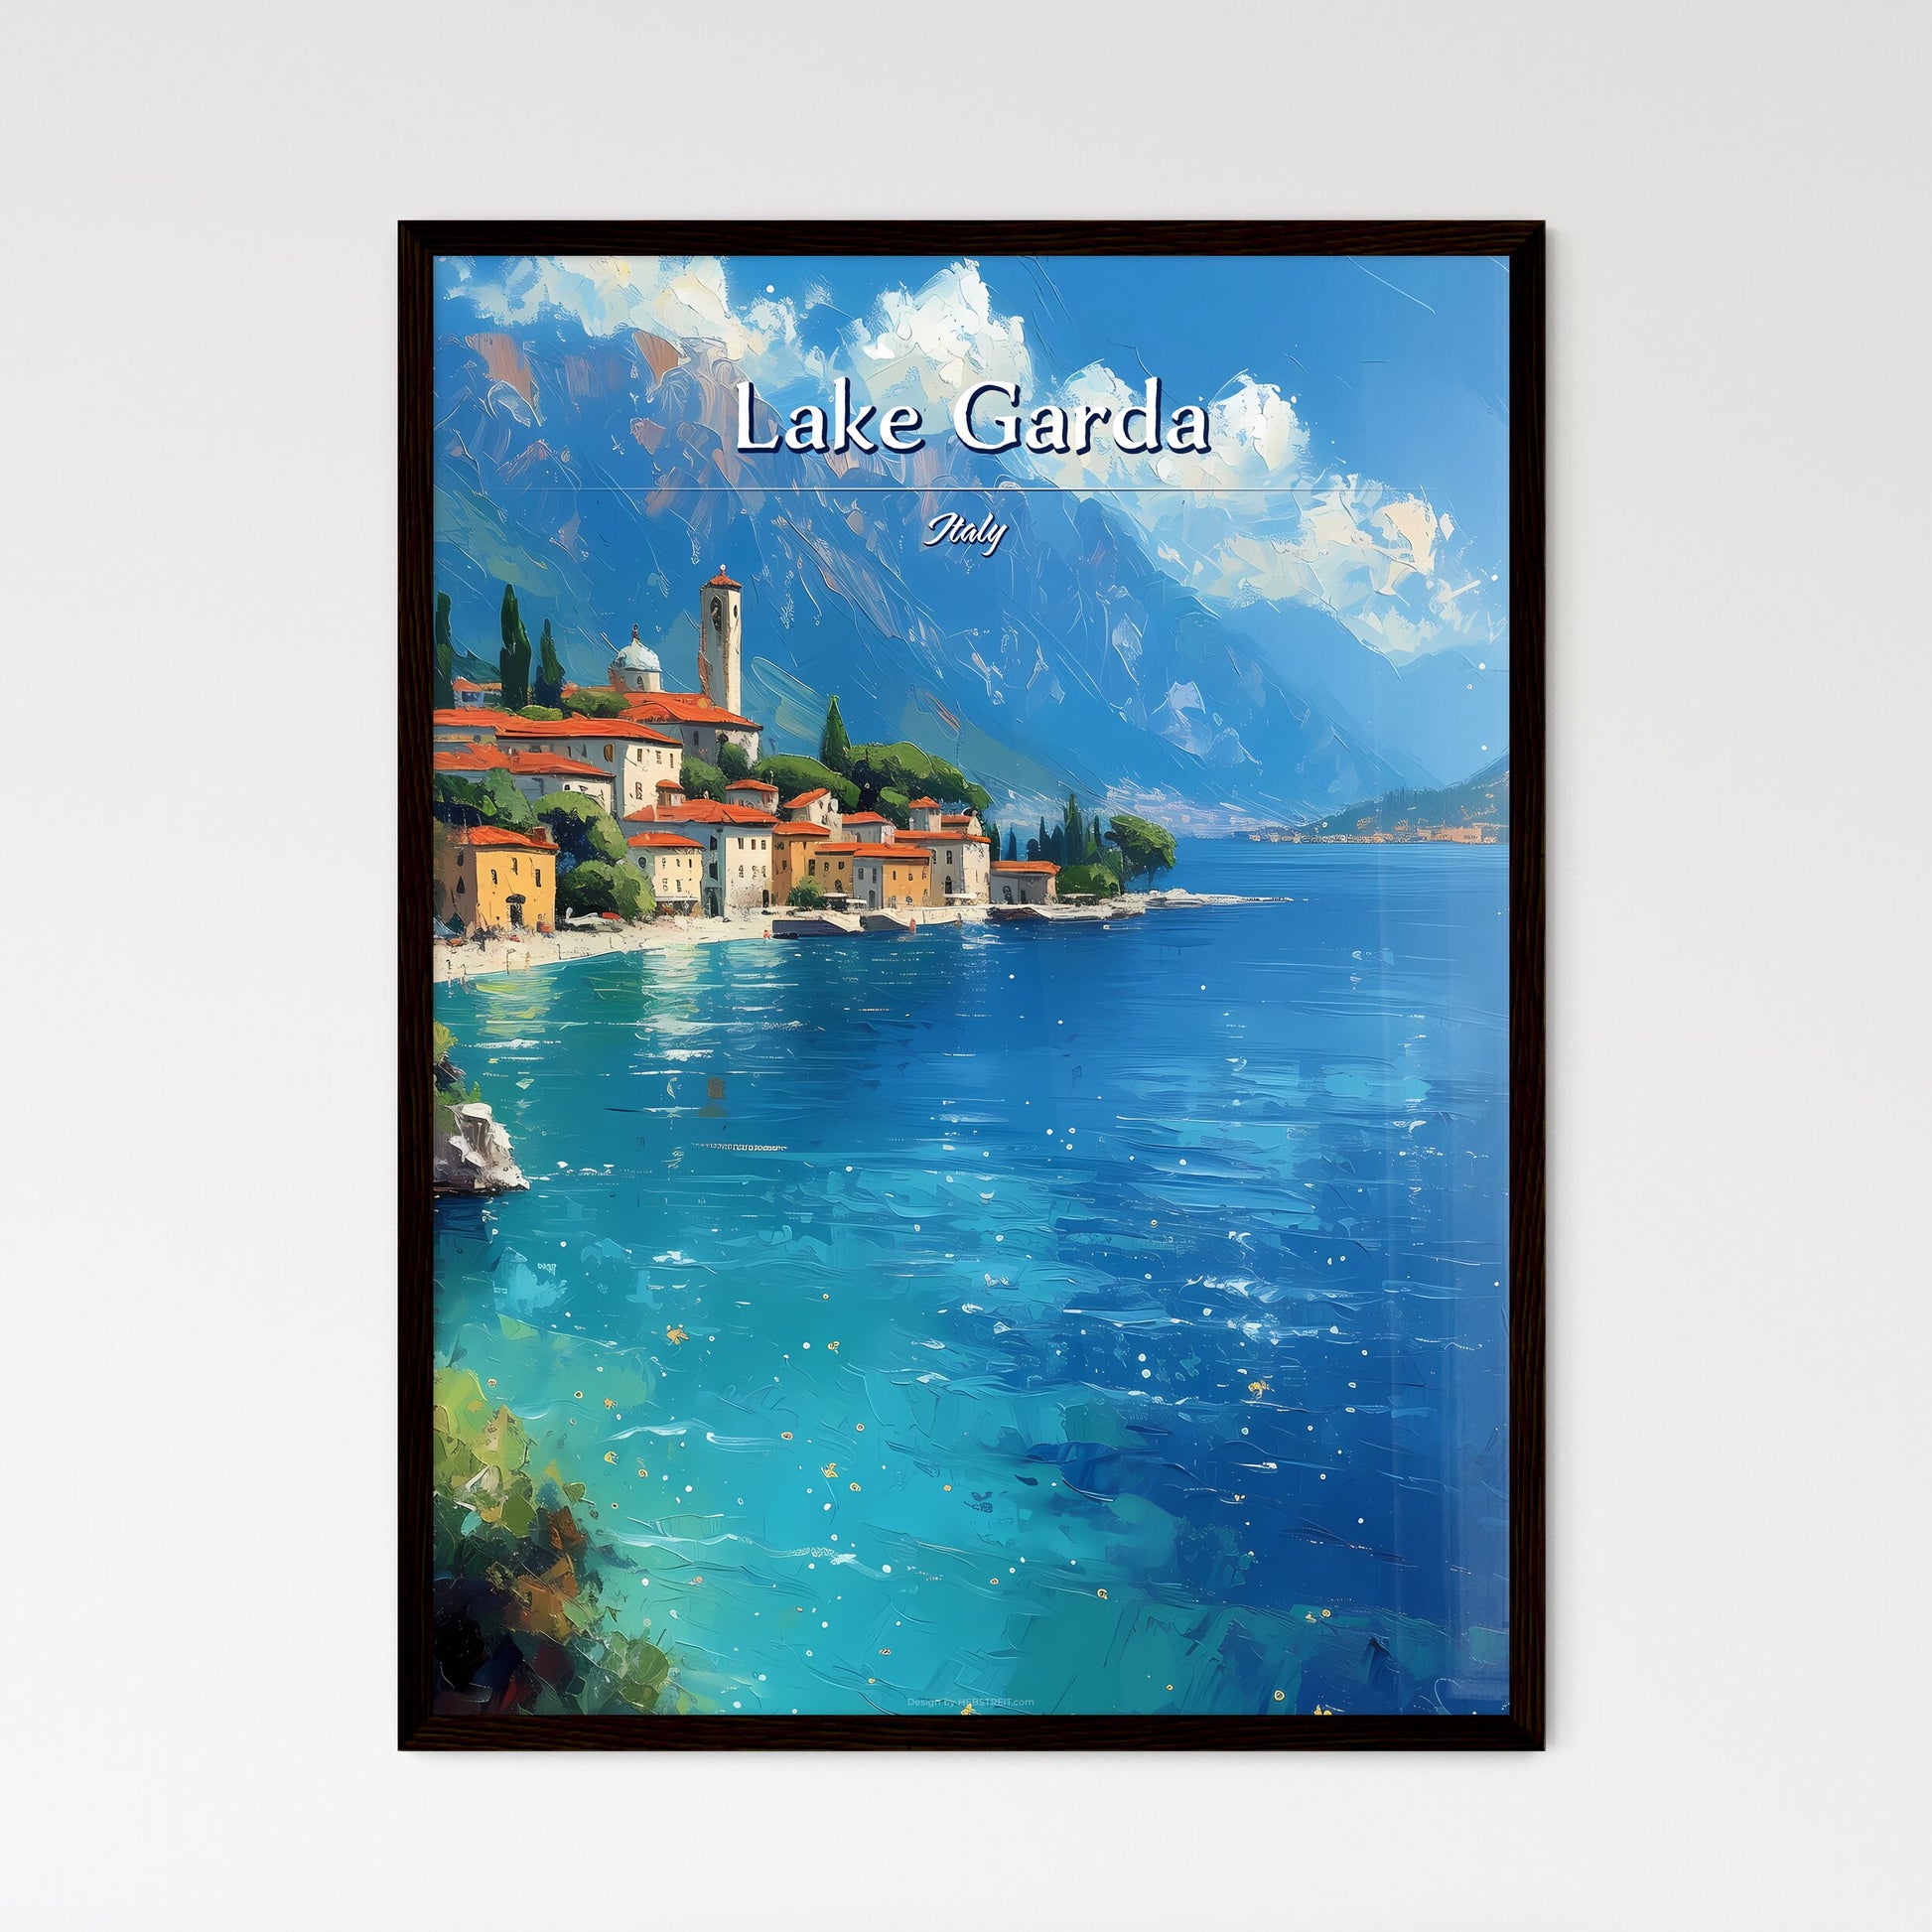 Lake Garda, Italy - Art print of a town next to a body of water Default Title